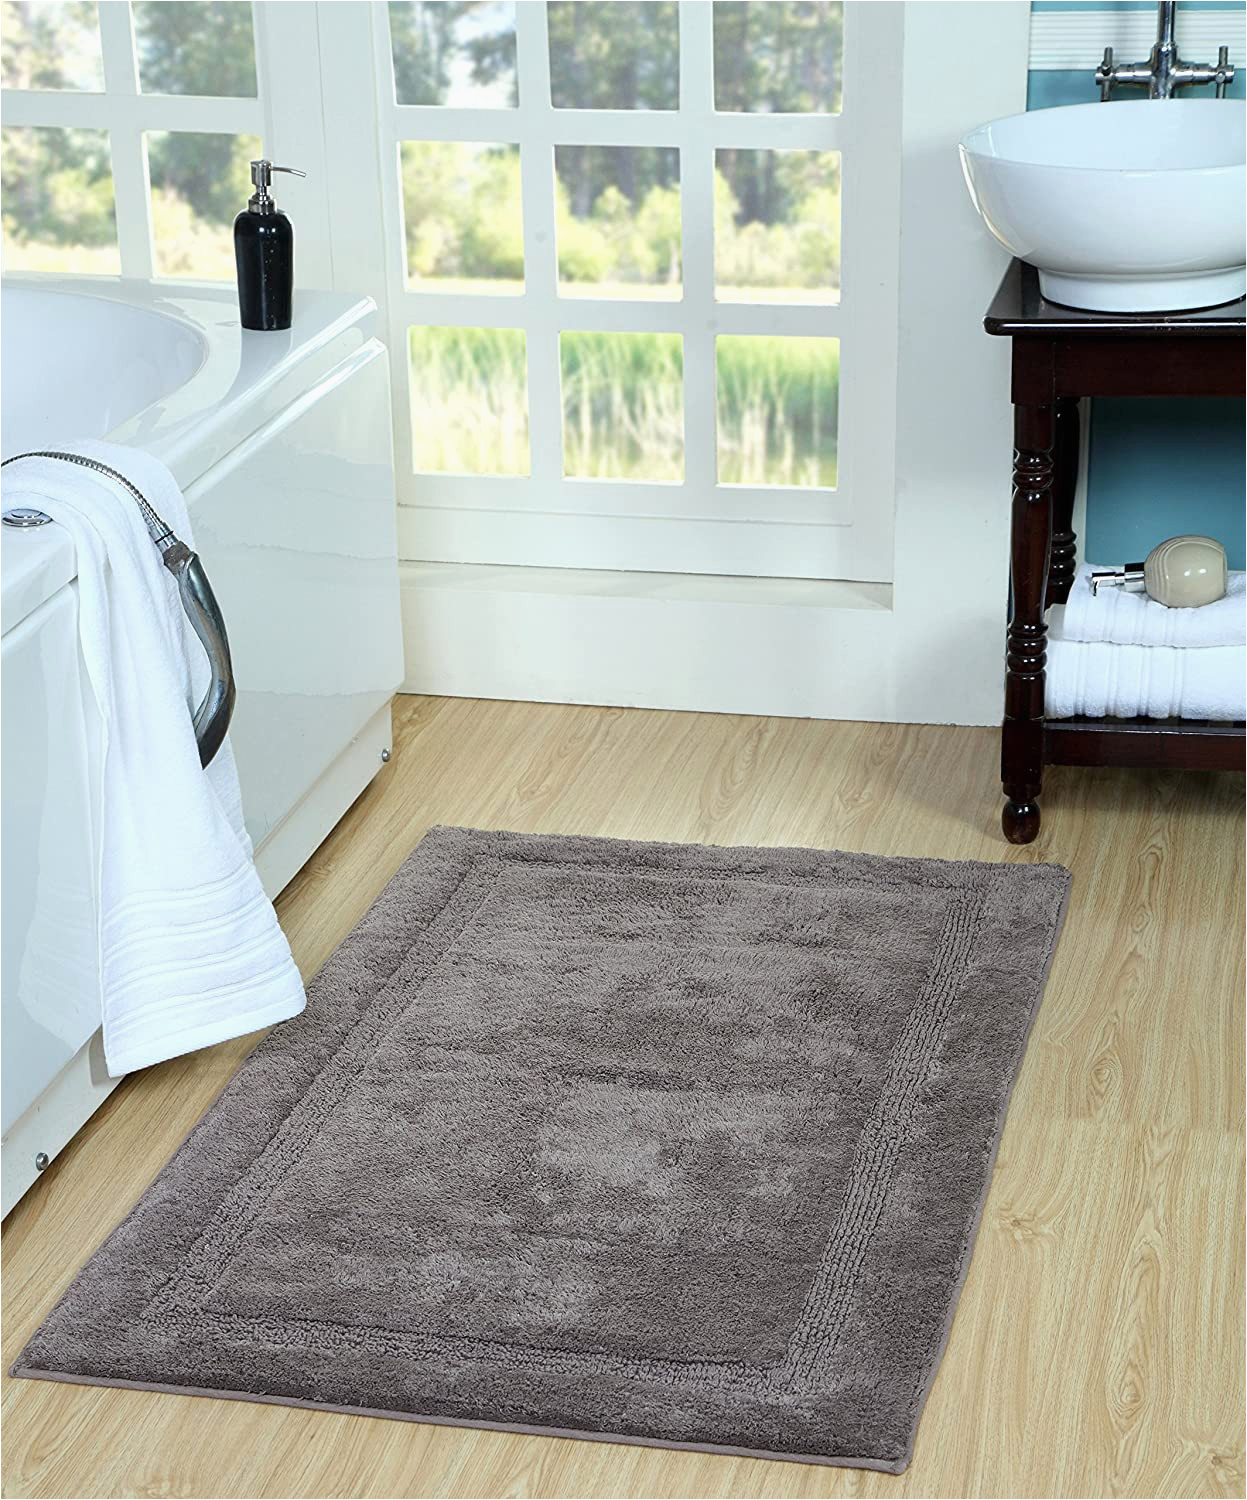 Cotton Non Skid Bath Rugs Saffron Fabs 2 Piece Bath Rug Set 100 soft Cotton Size 24×17 Inch and 34×21 Inch Latex Spray Non Skid Backing solid Gray Color Textured Border